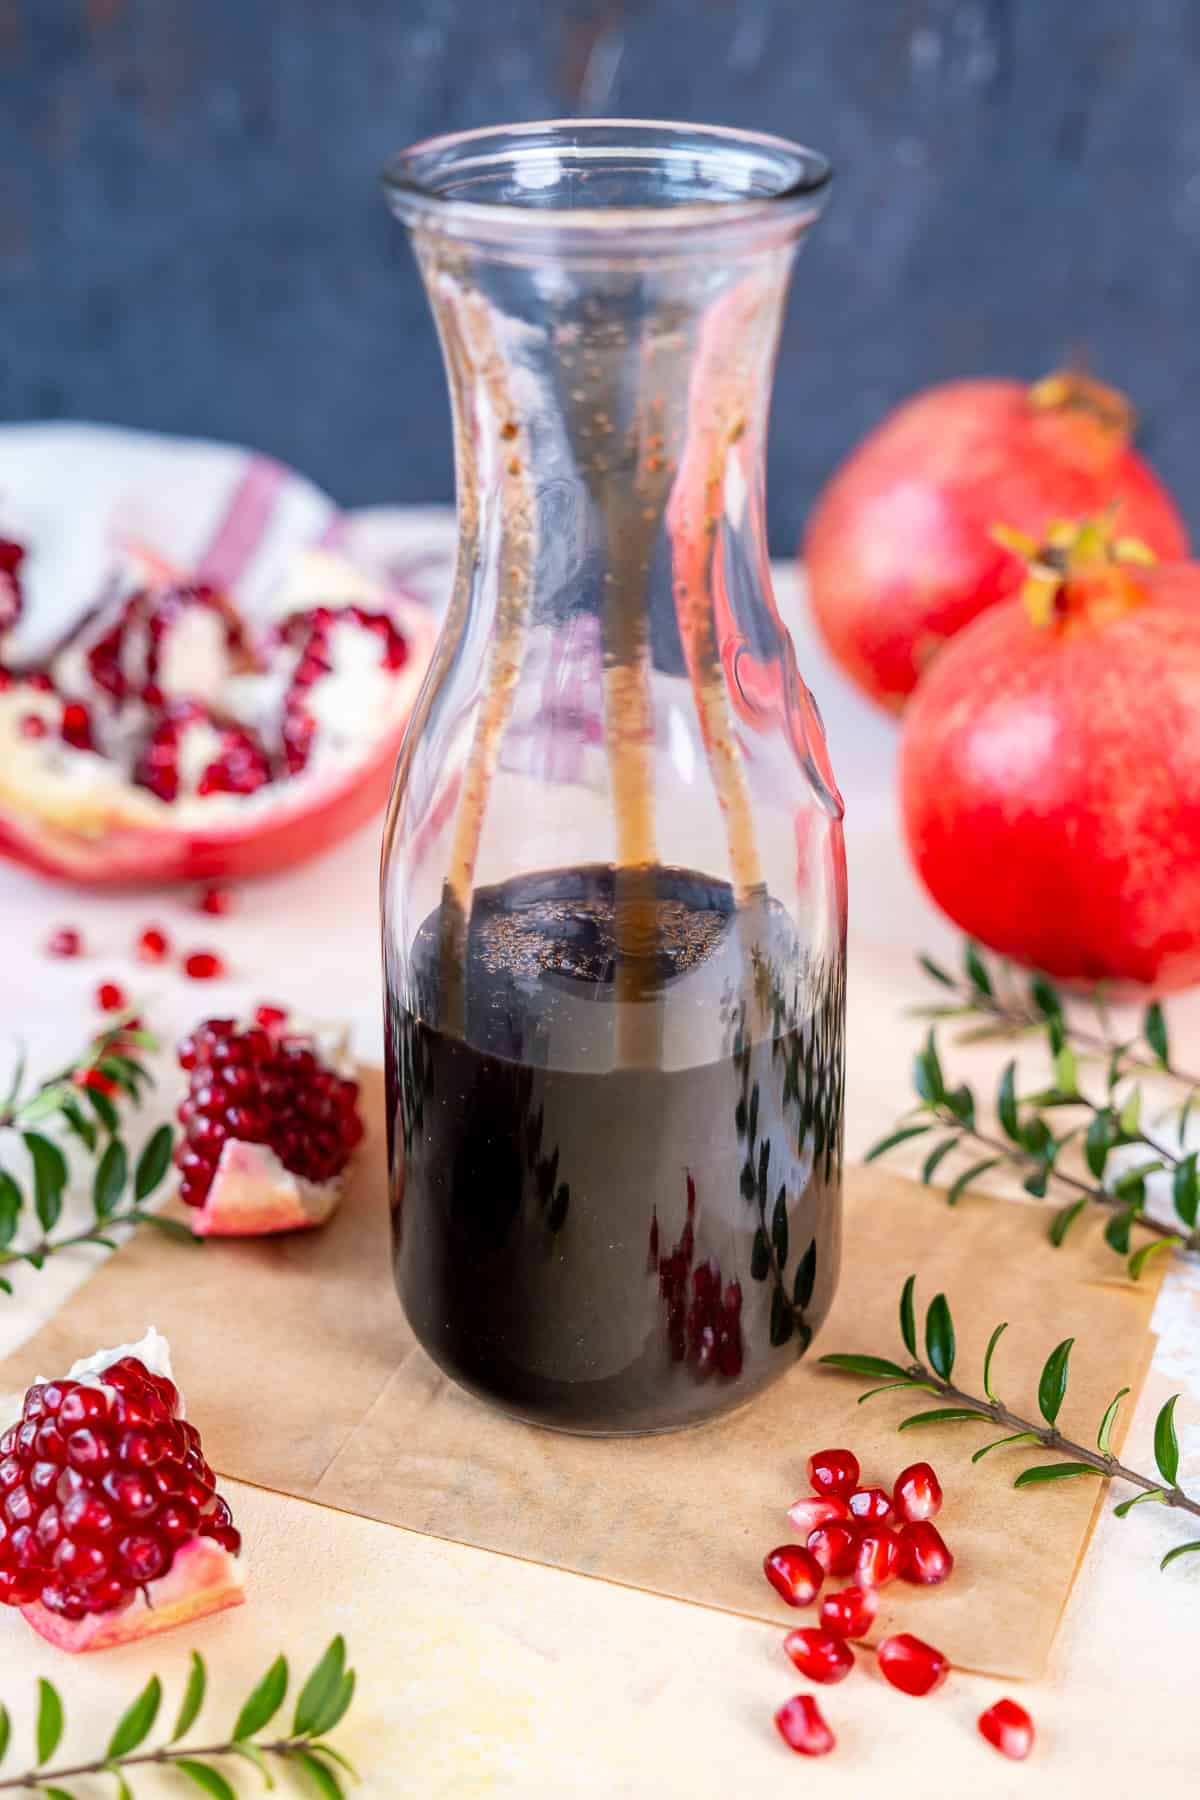 Pomegranate syrup in a bottle.